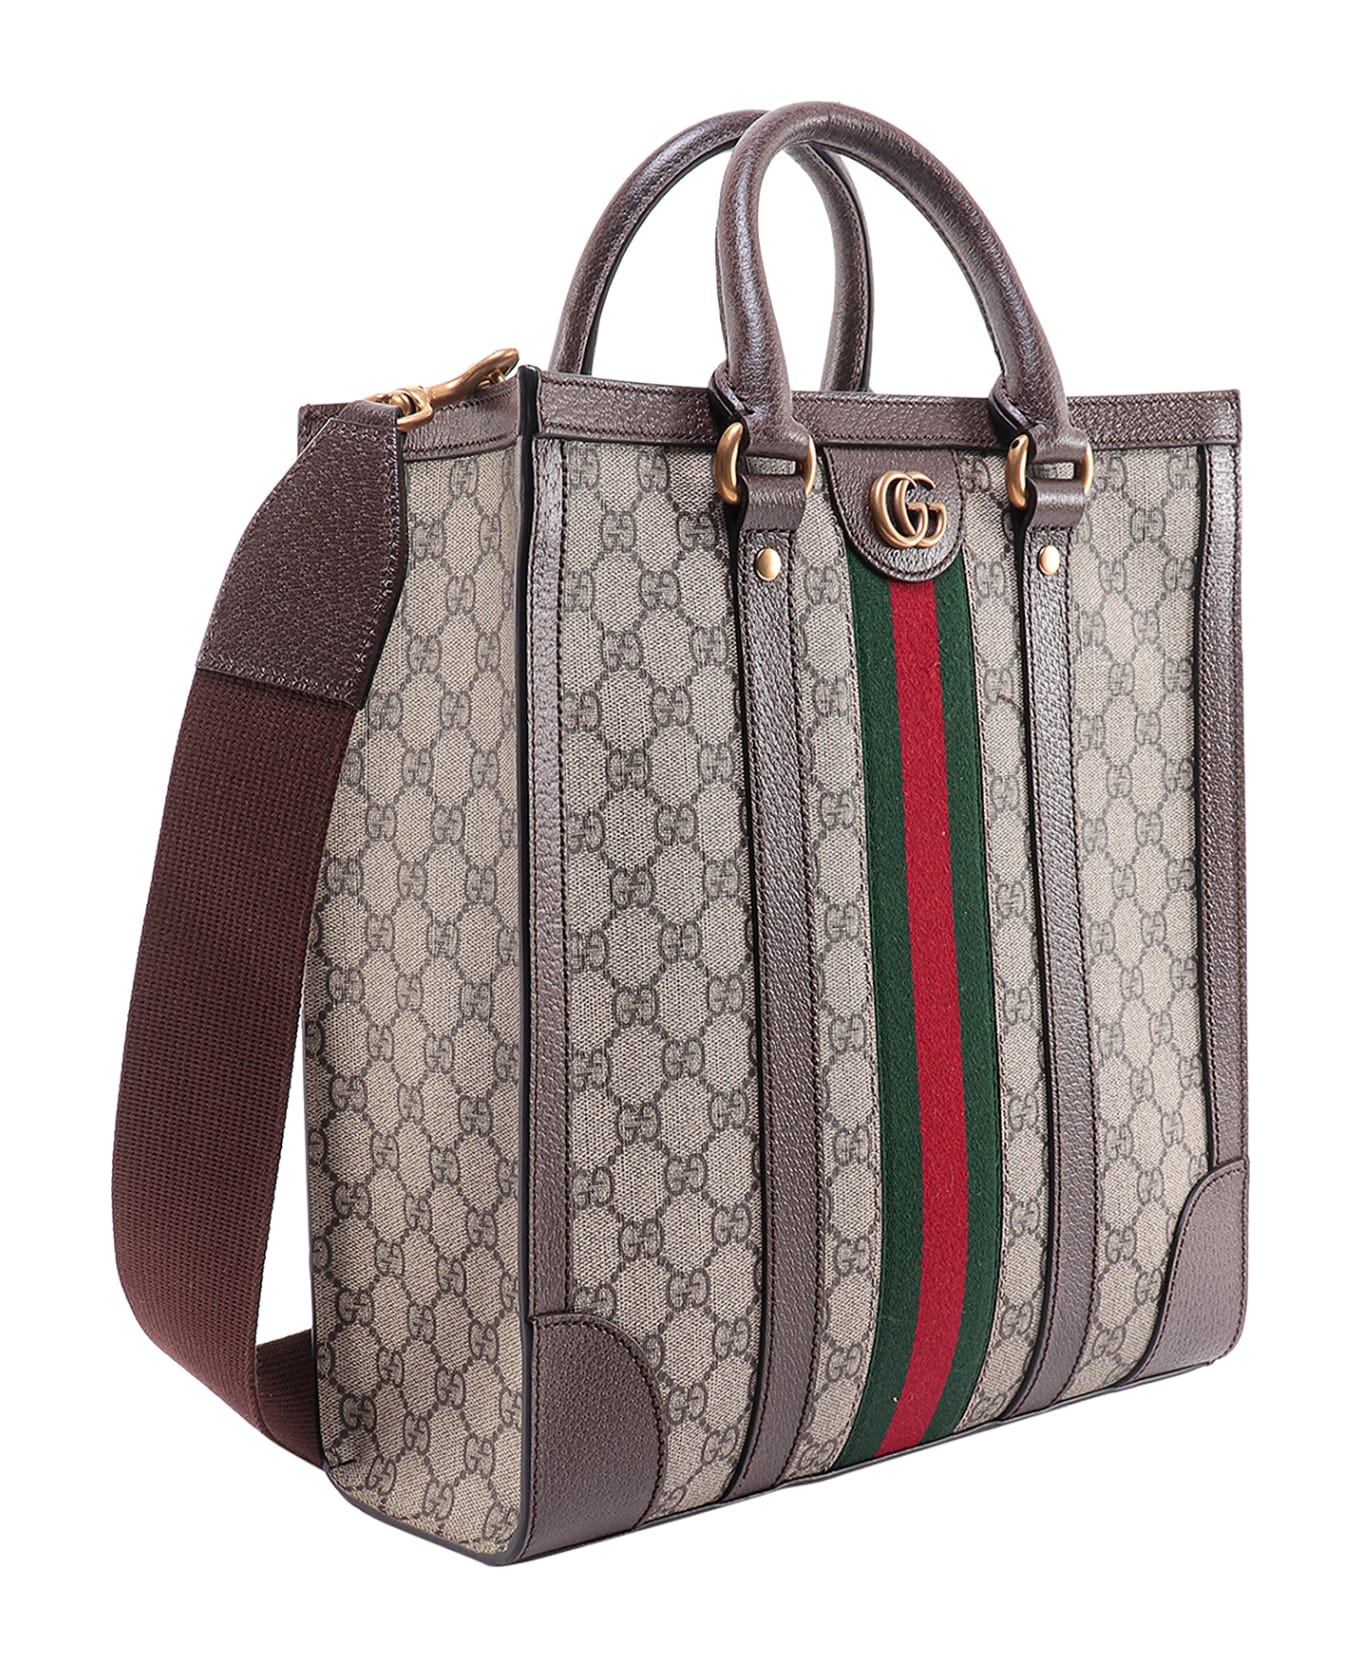 Gucci Ophidia Tote Bag - Brown